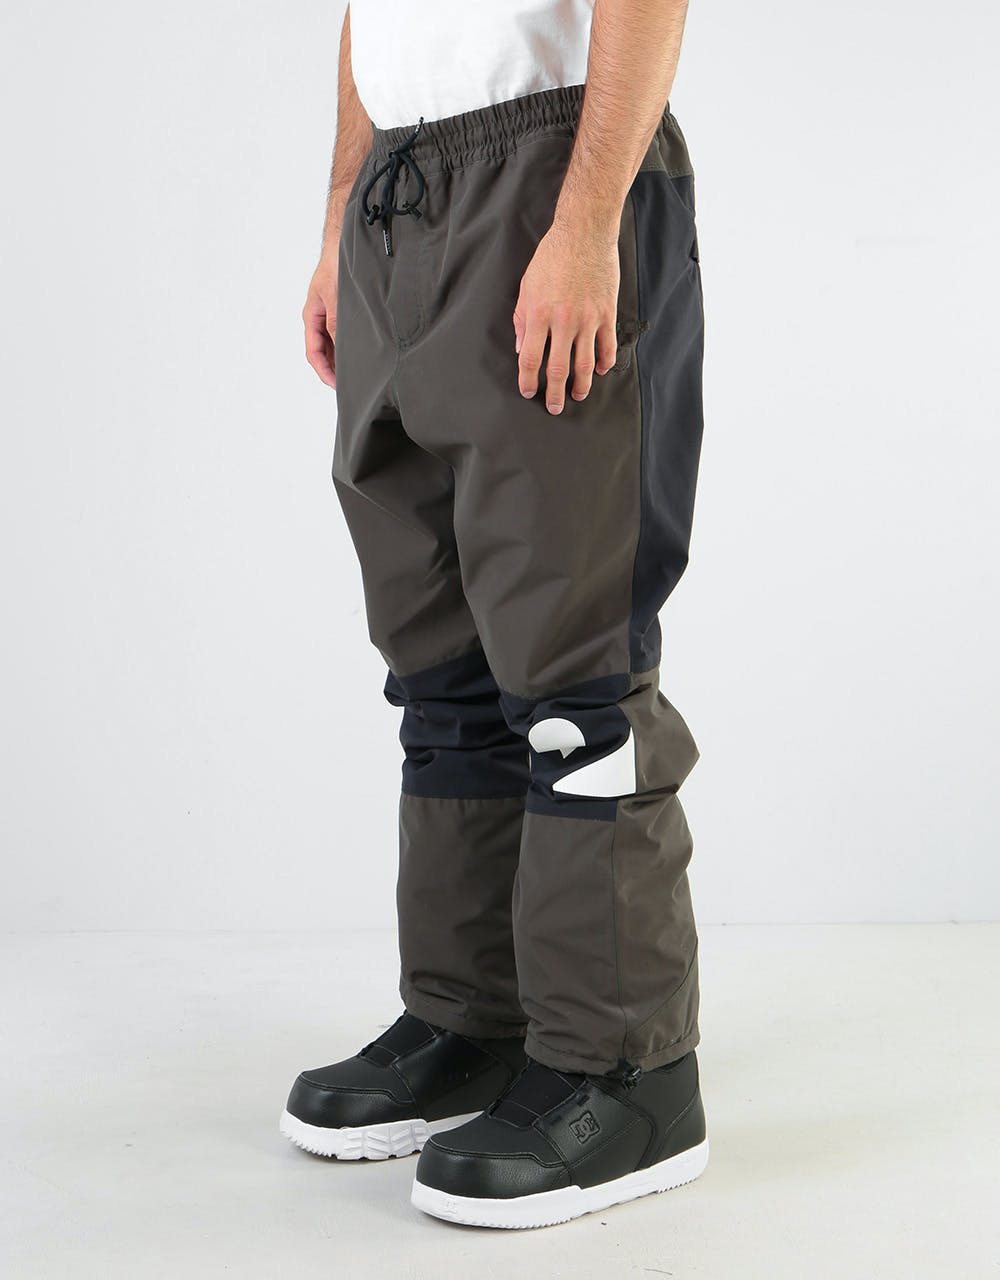 ThirtyTwo Sweeper Pant 2020 Snowboard Pants - Graphite